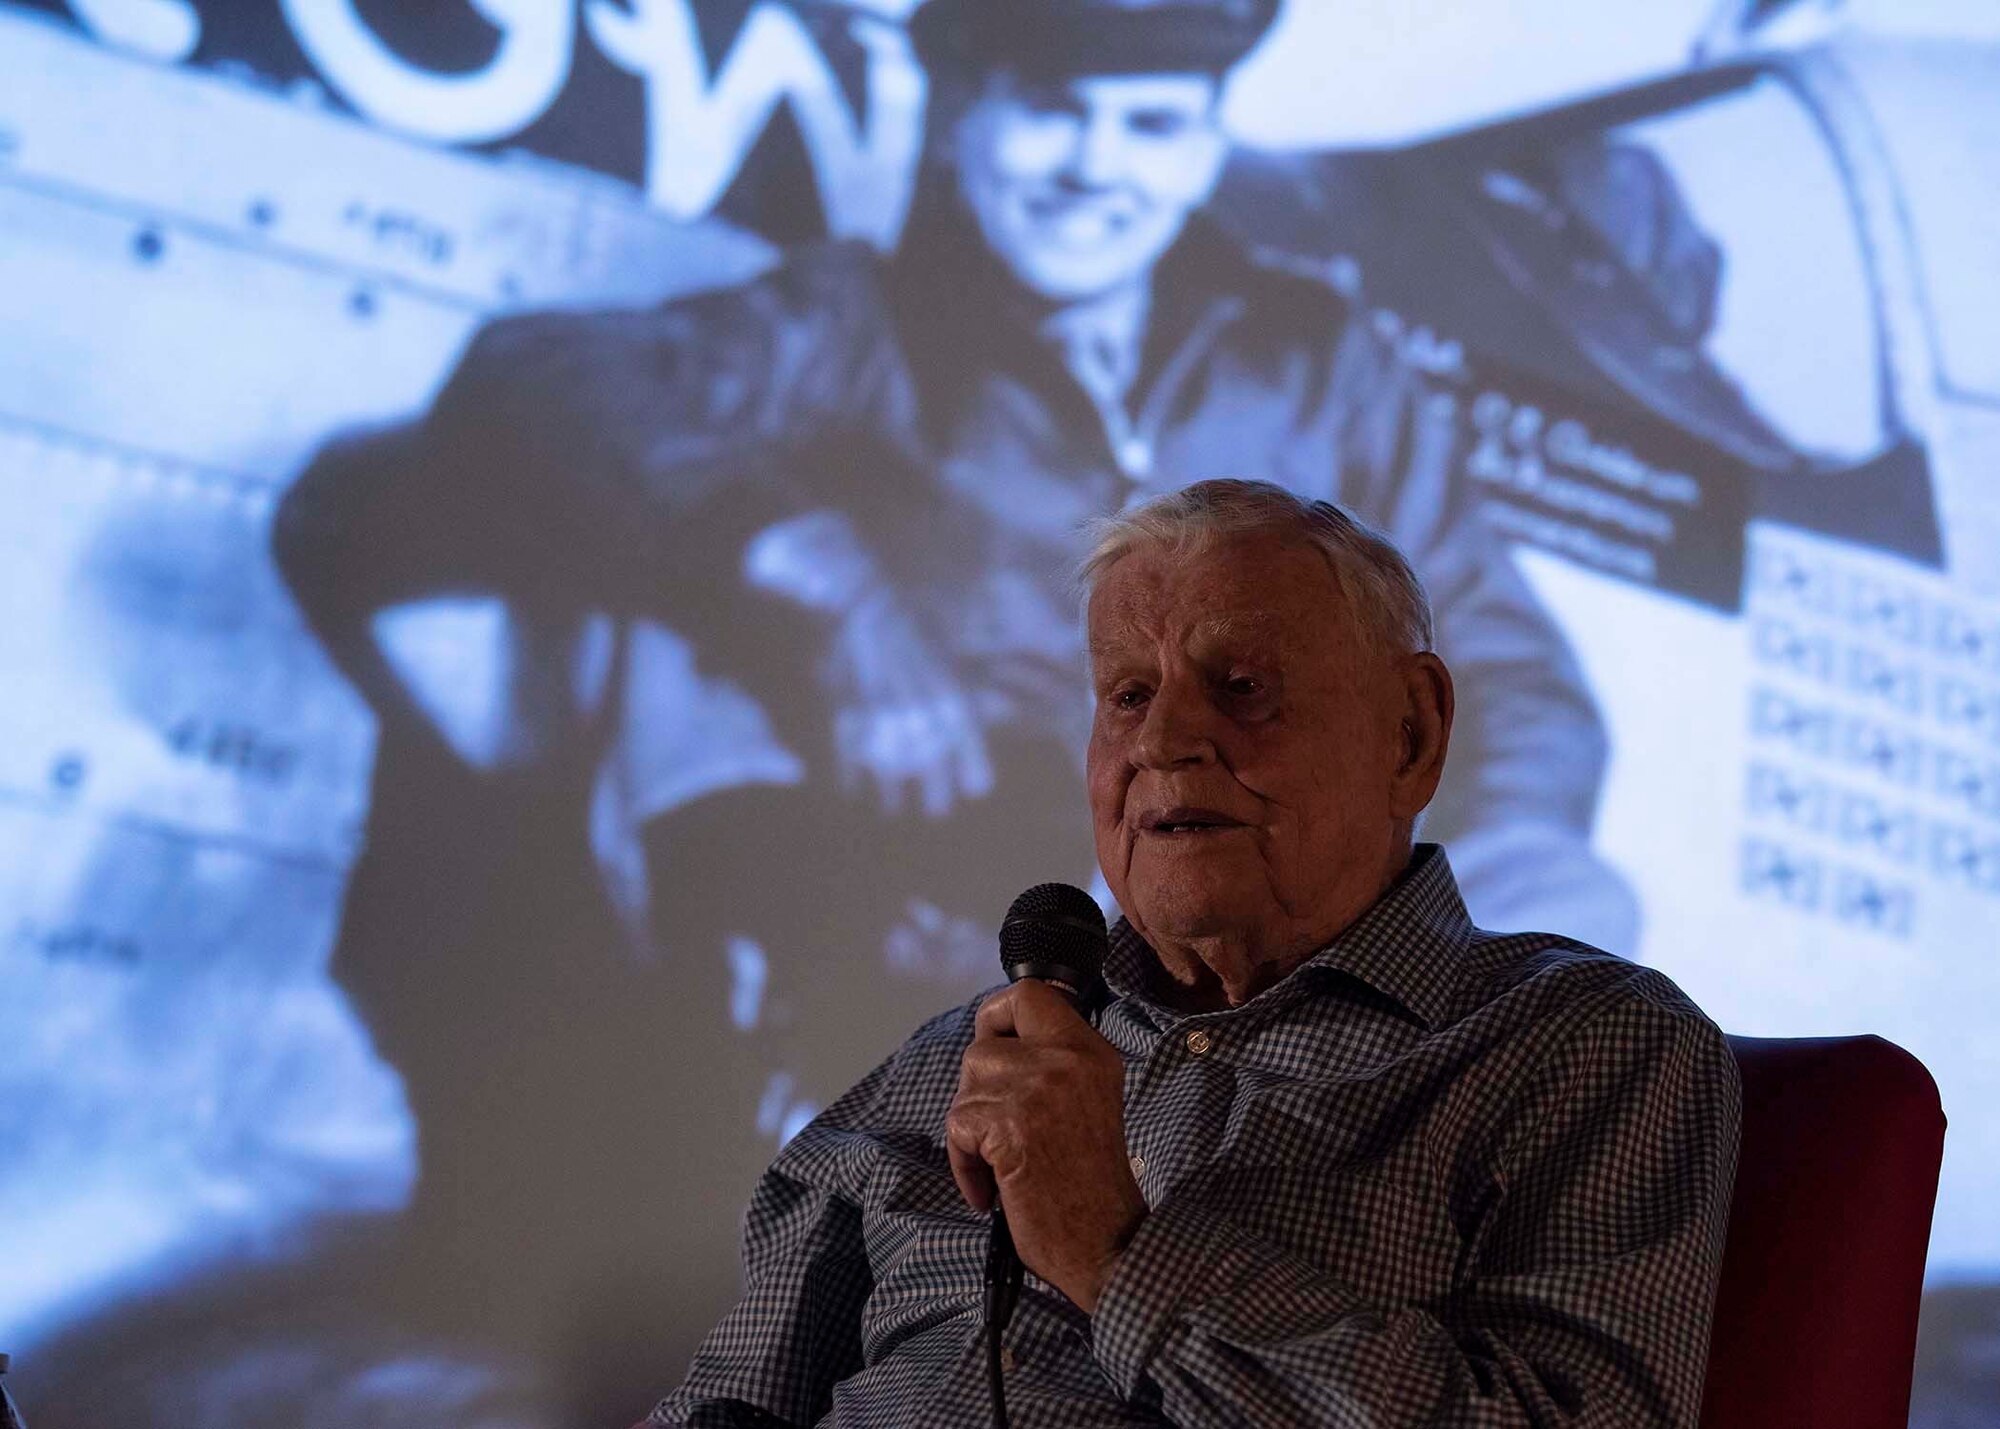 An Army Air Corps retiree holds a microphone.